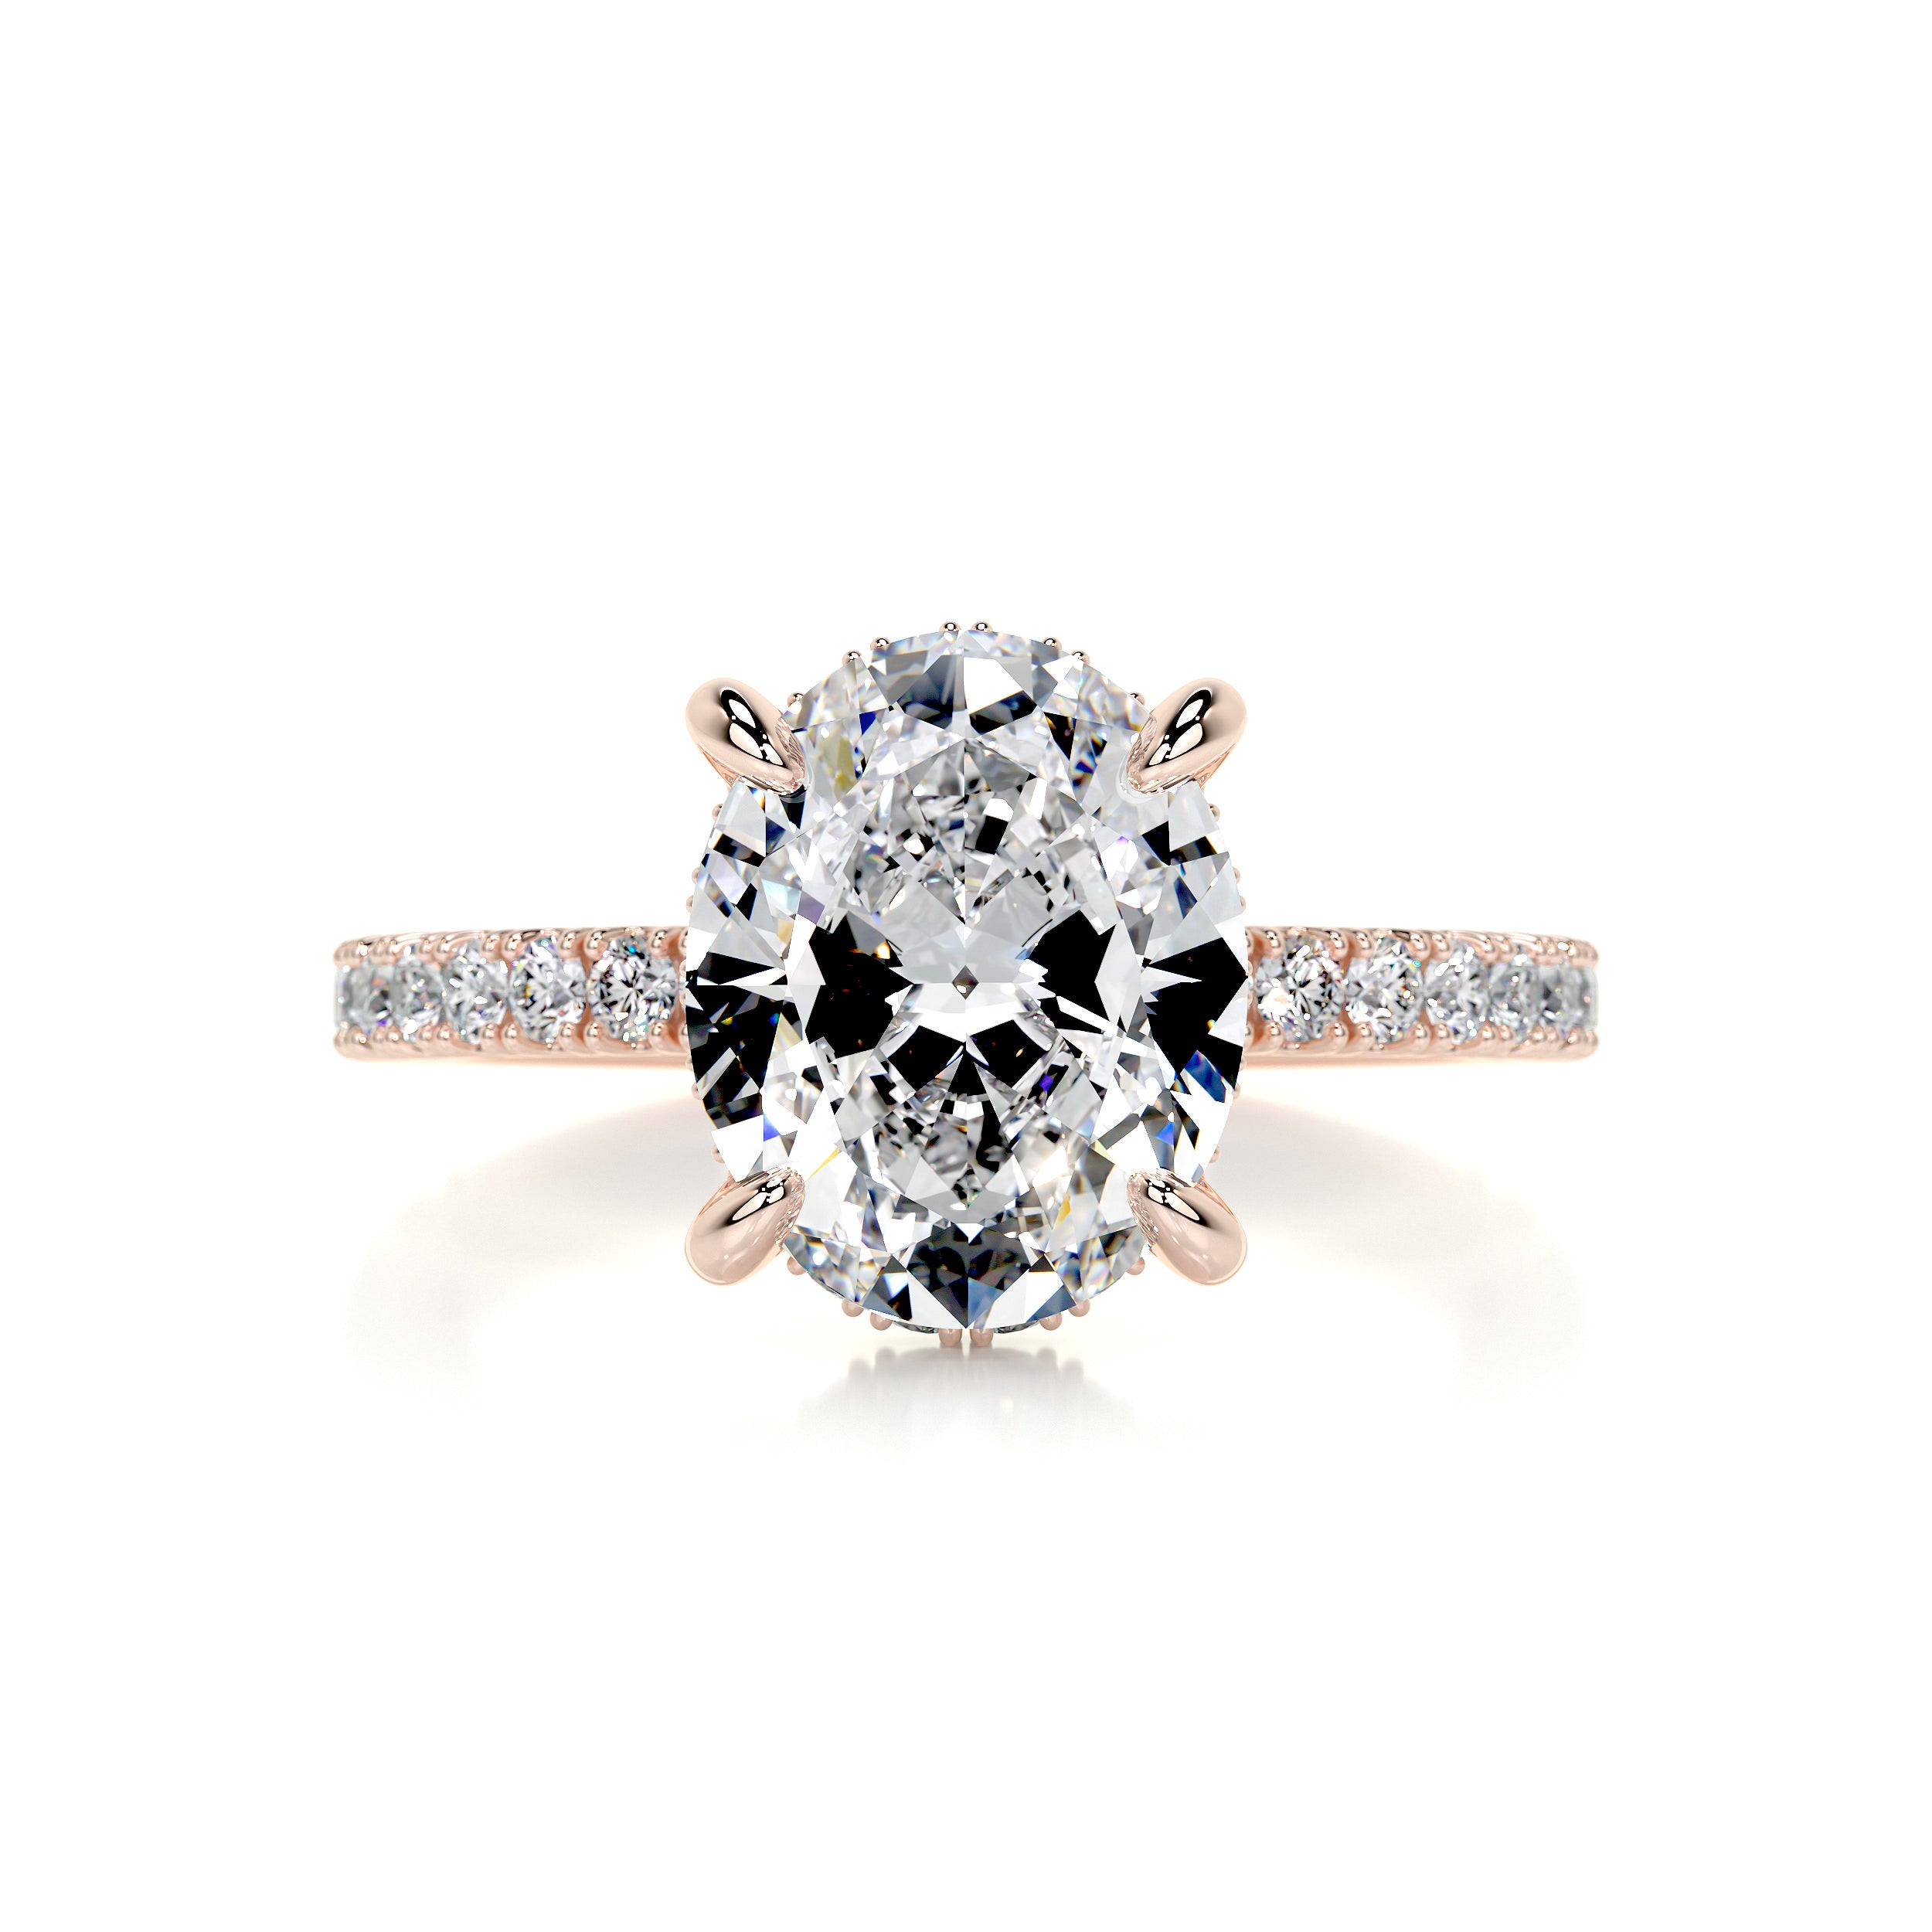 Lucy Diamond Engagement Ring -14K Rose Gold